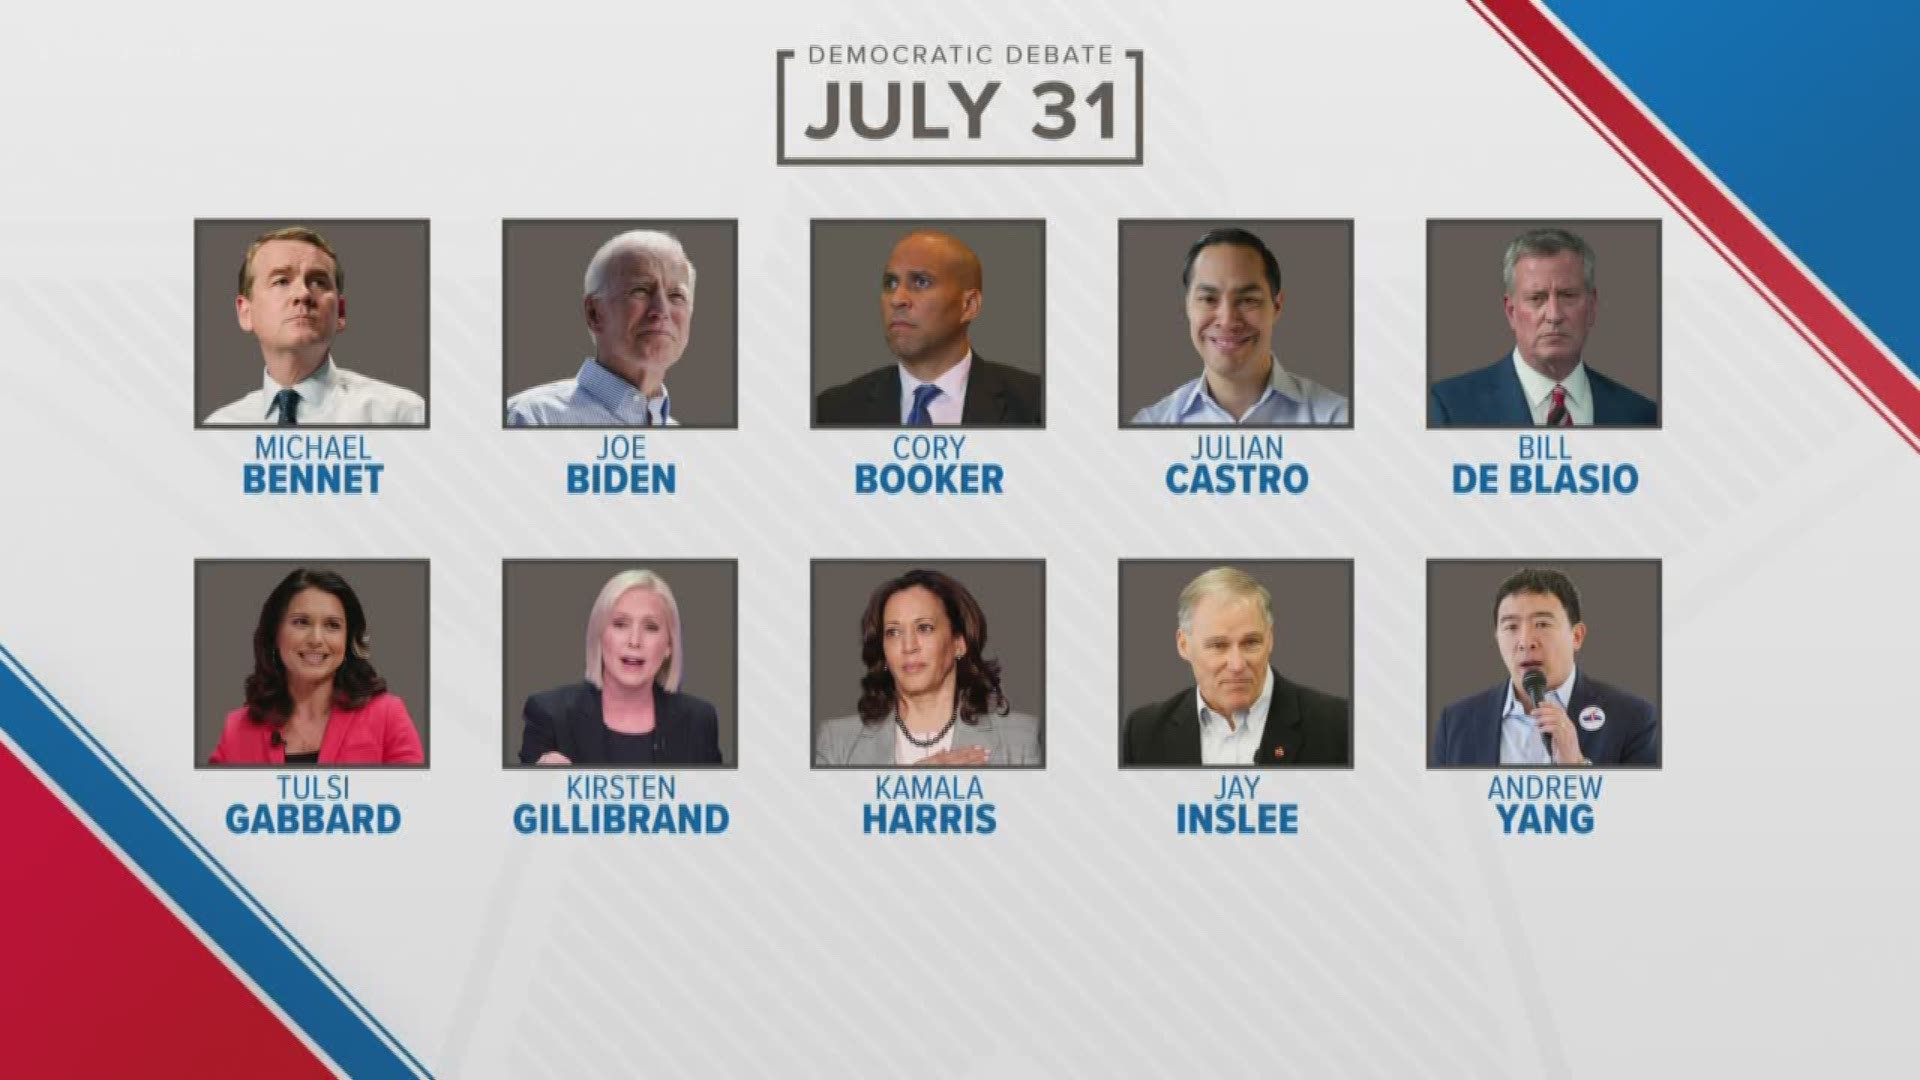 Here's what to expect from the 10 candidates in the second night of the Democratic debate.